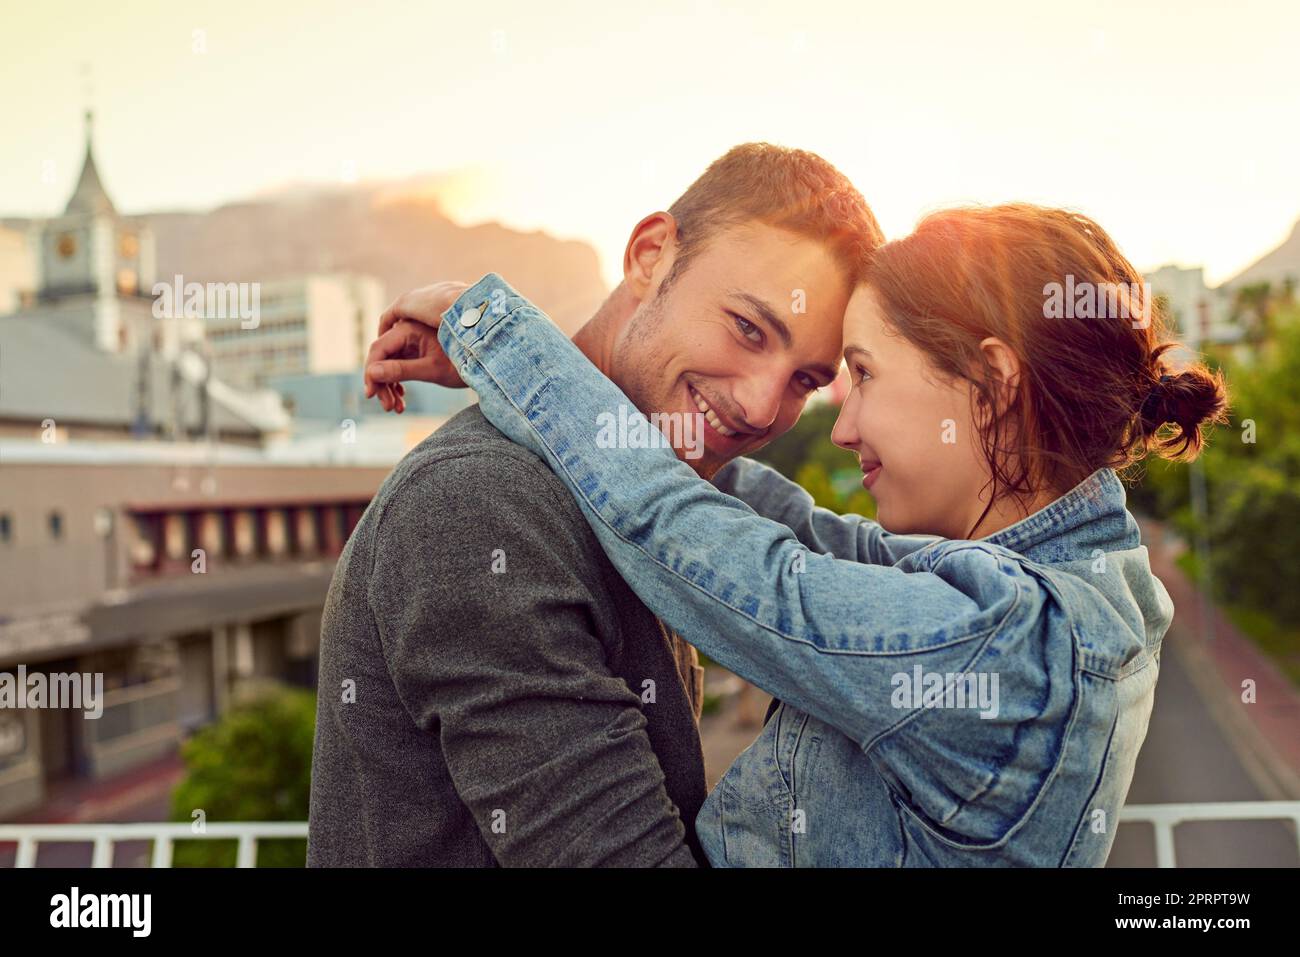 Im a lucky guy. a happy young couple enjoying a romantic moment in the city. Stock Photo